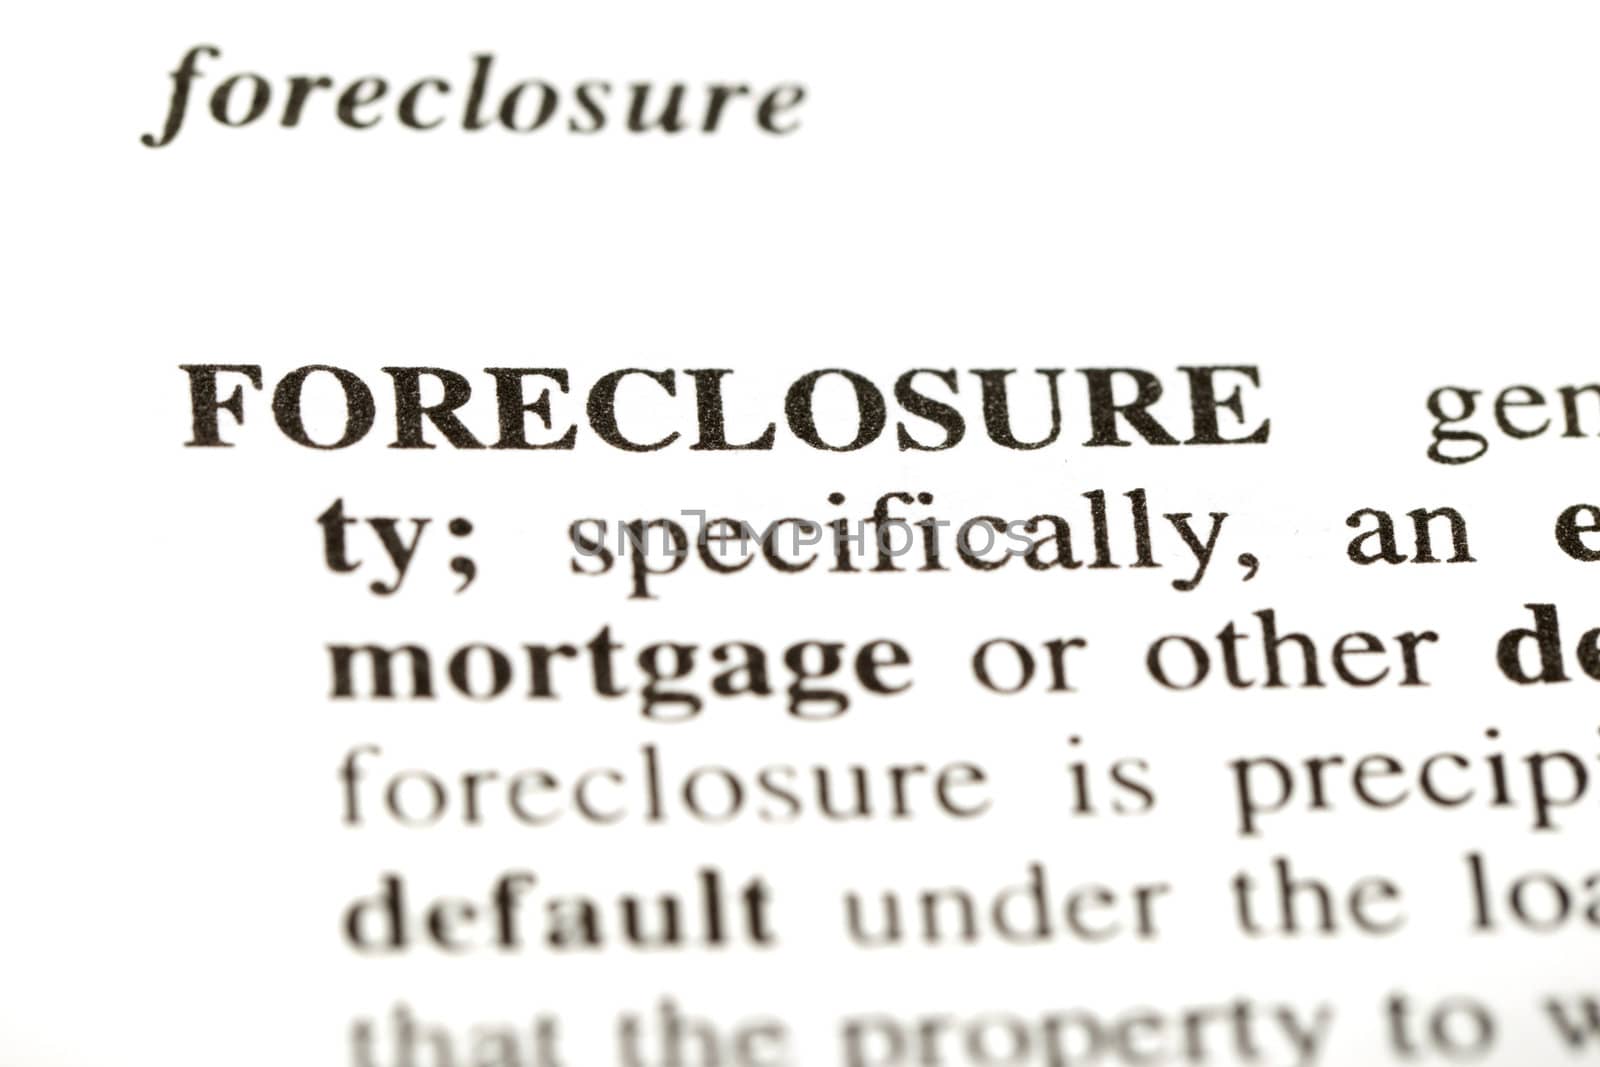 Definition of the word foreclosure  from a legal dictionary